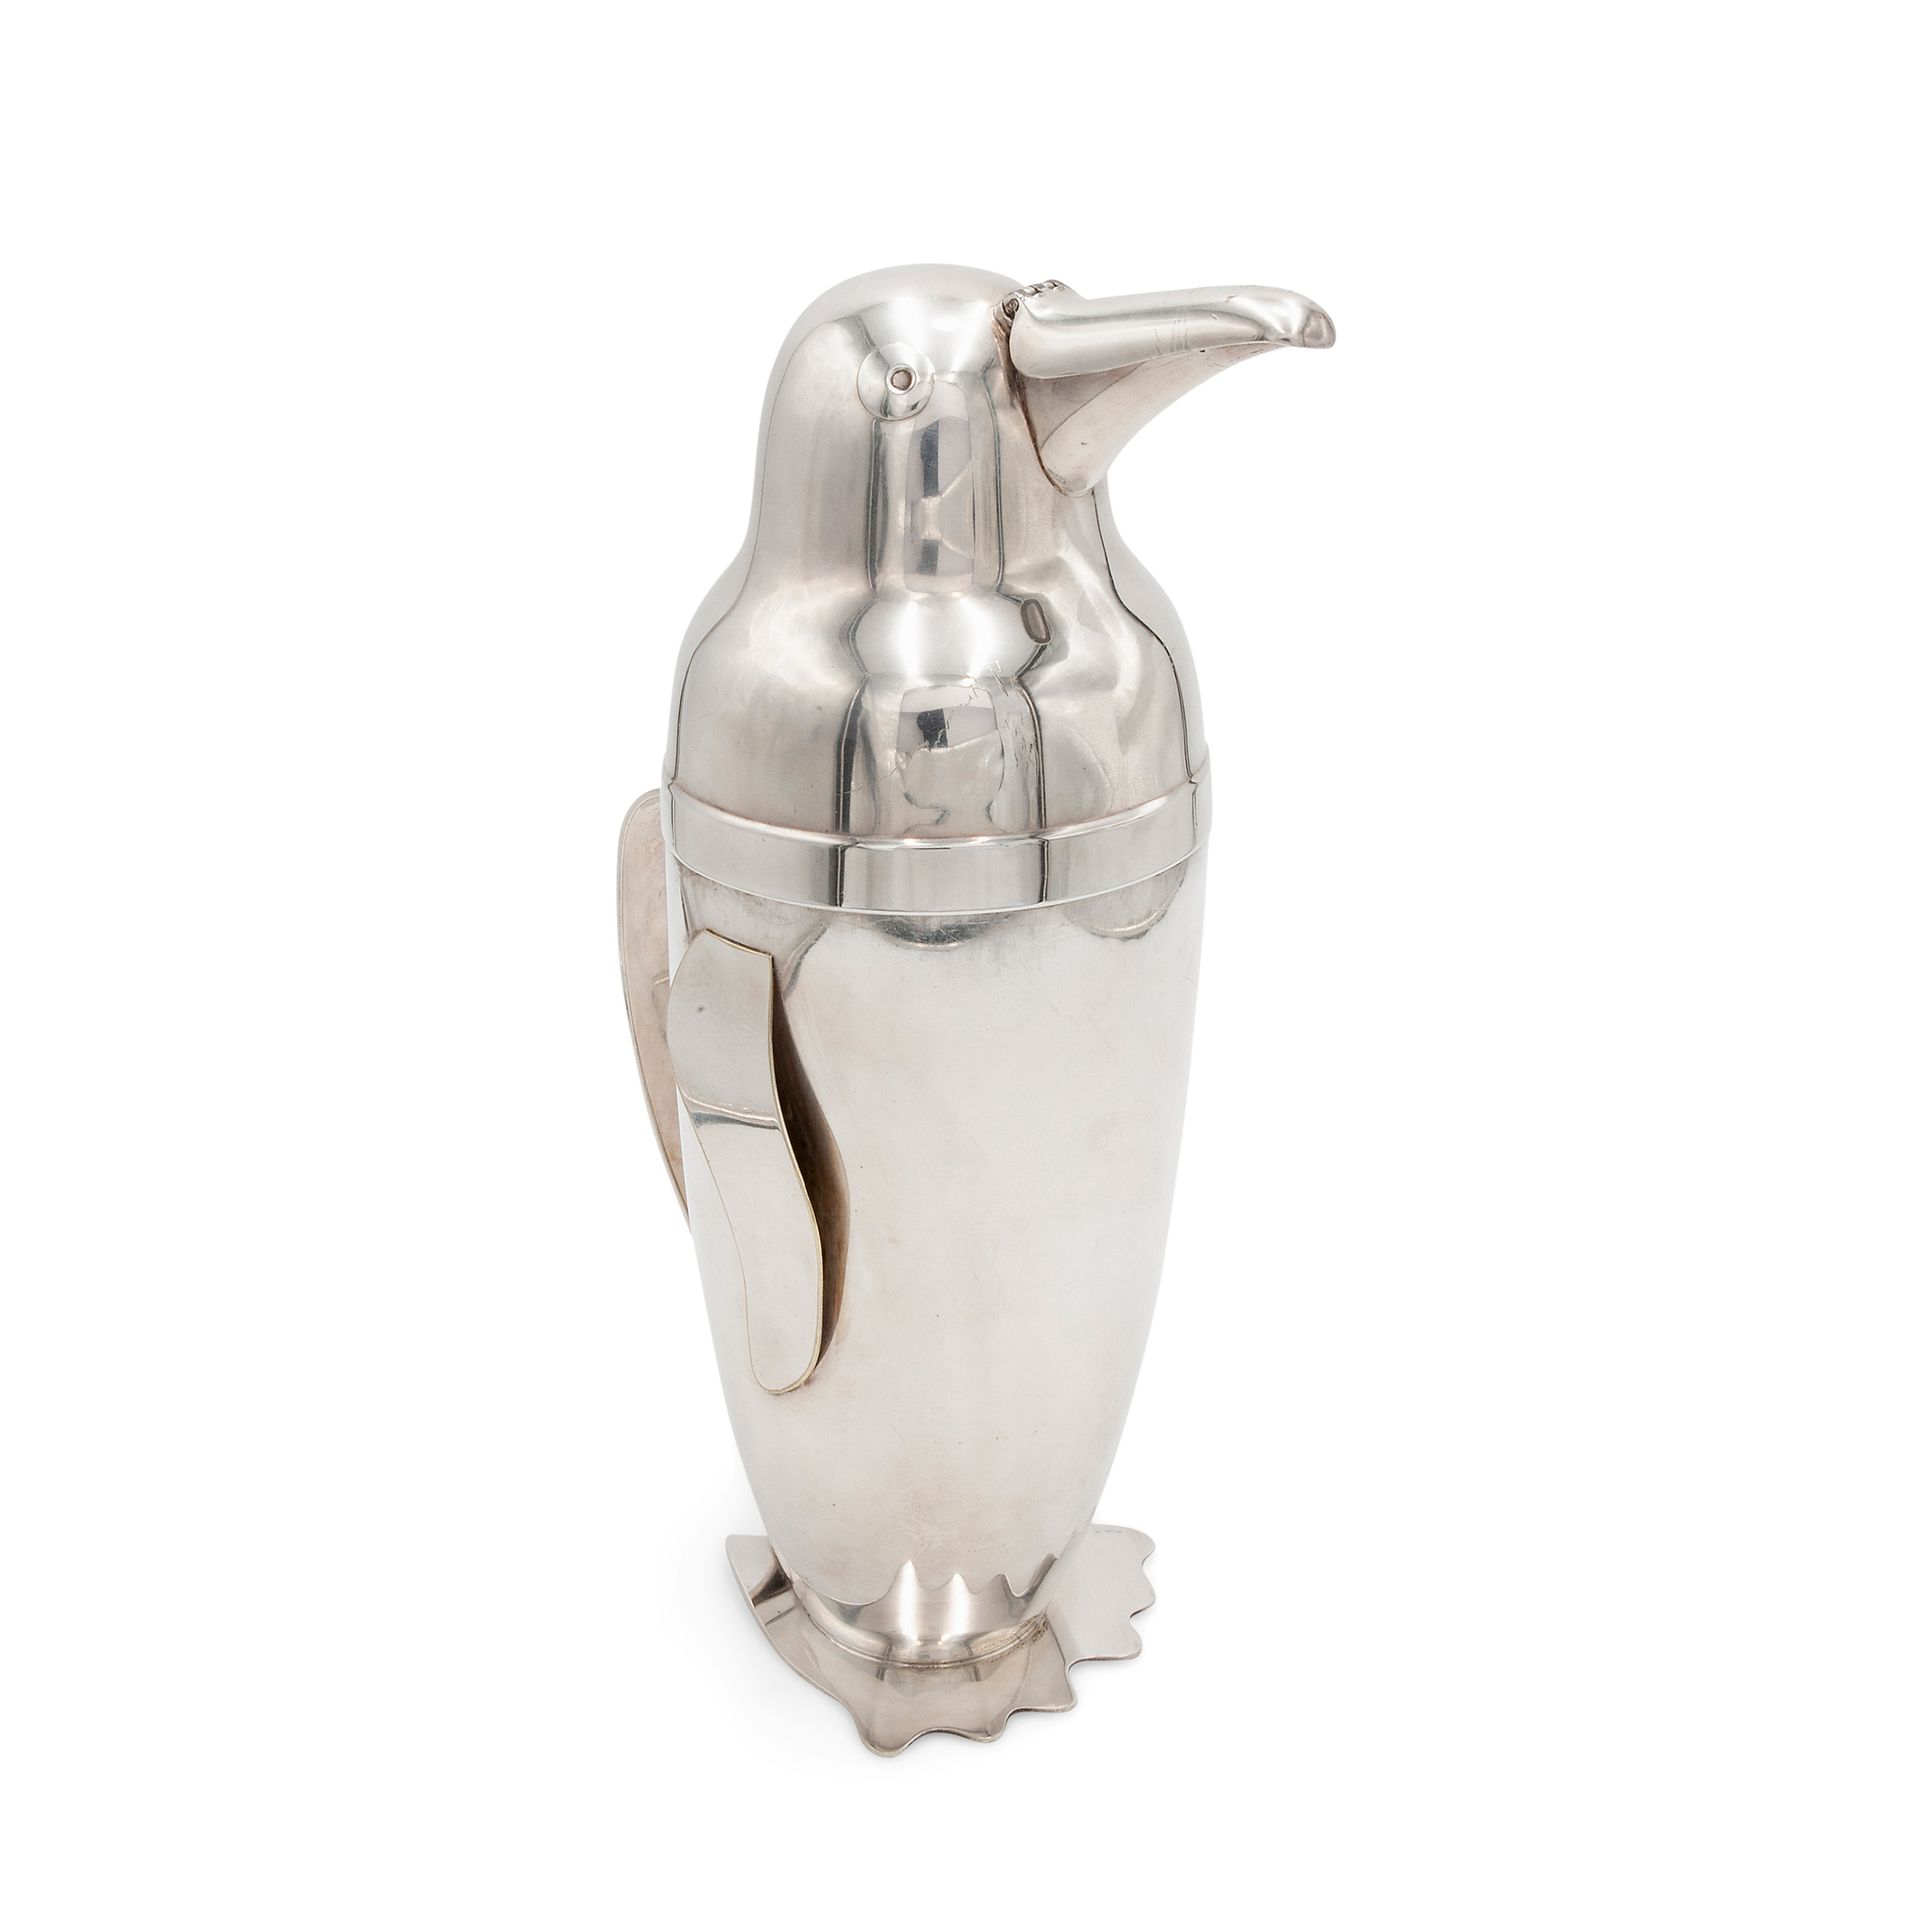 Emil A. Schuelke, Penguin cocktail shaker, circa 1936 Made of silver-plated meta&hellip;